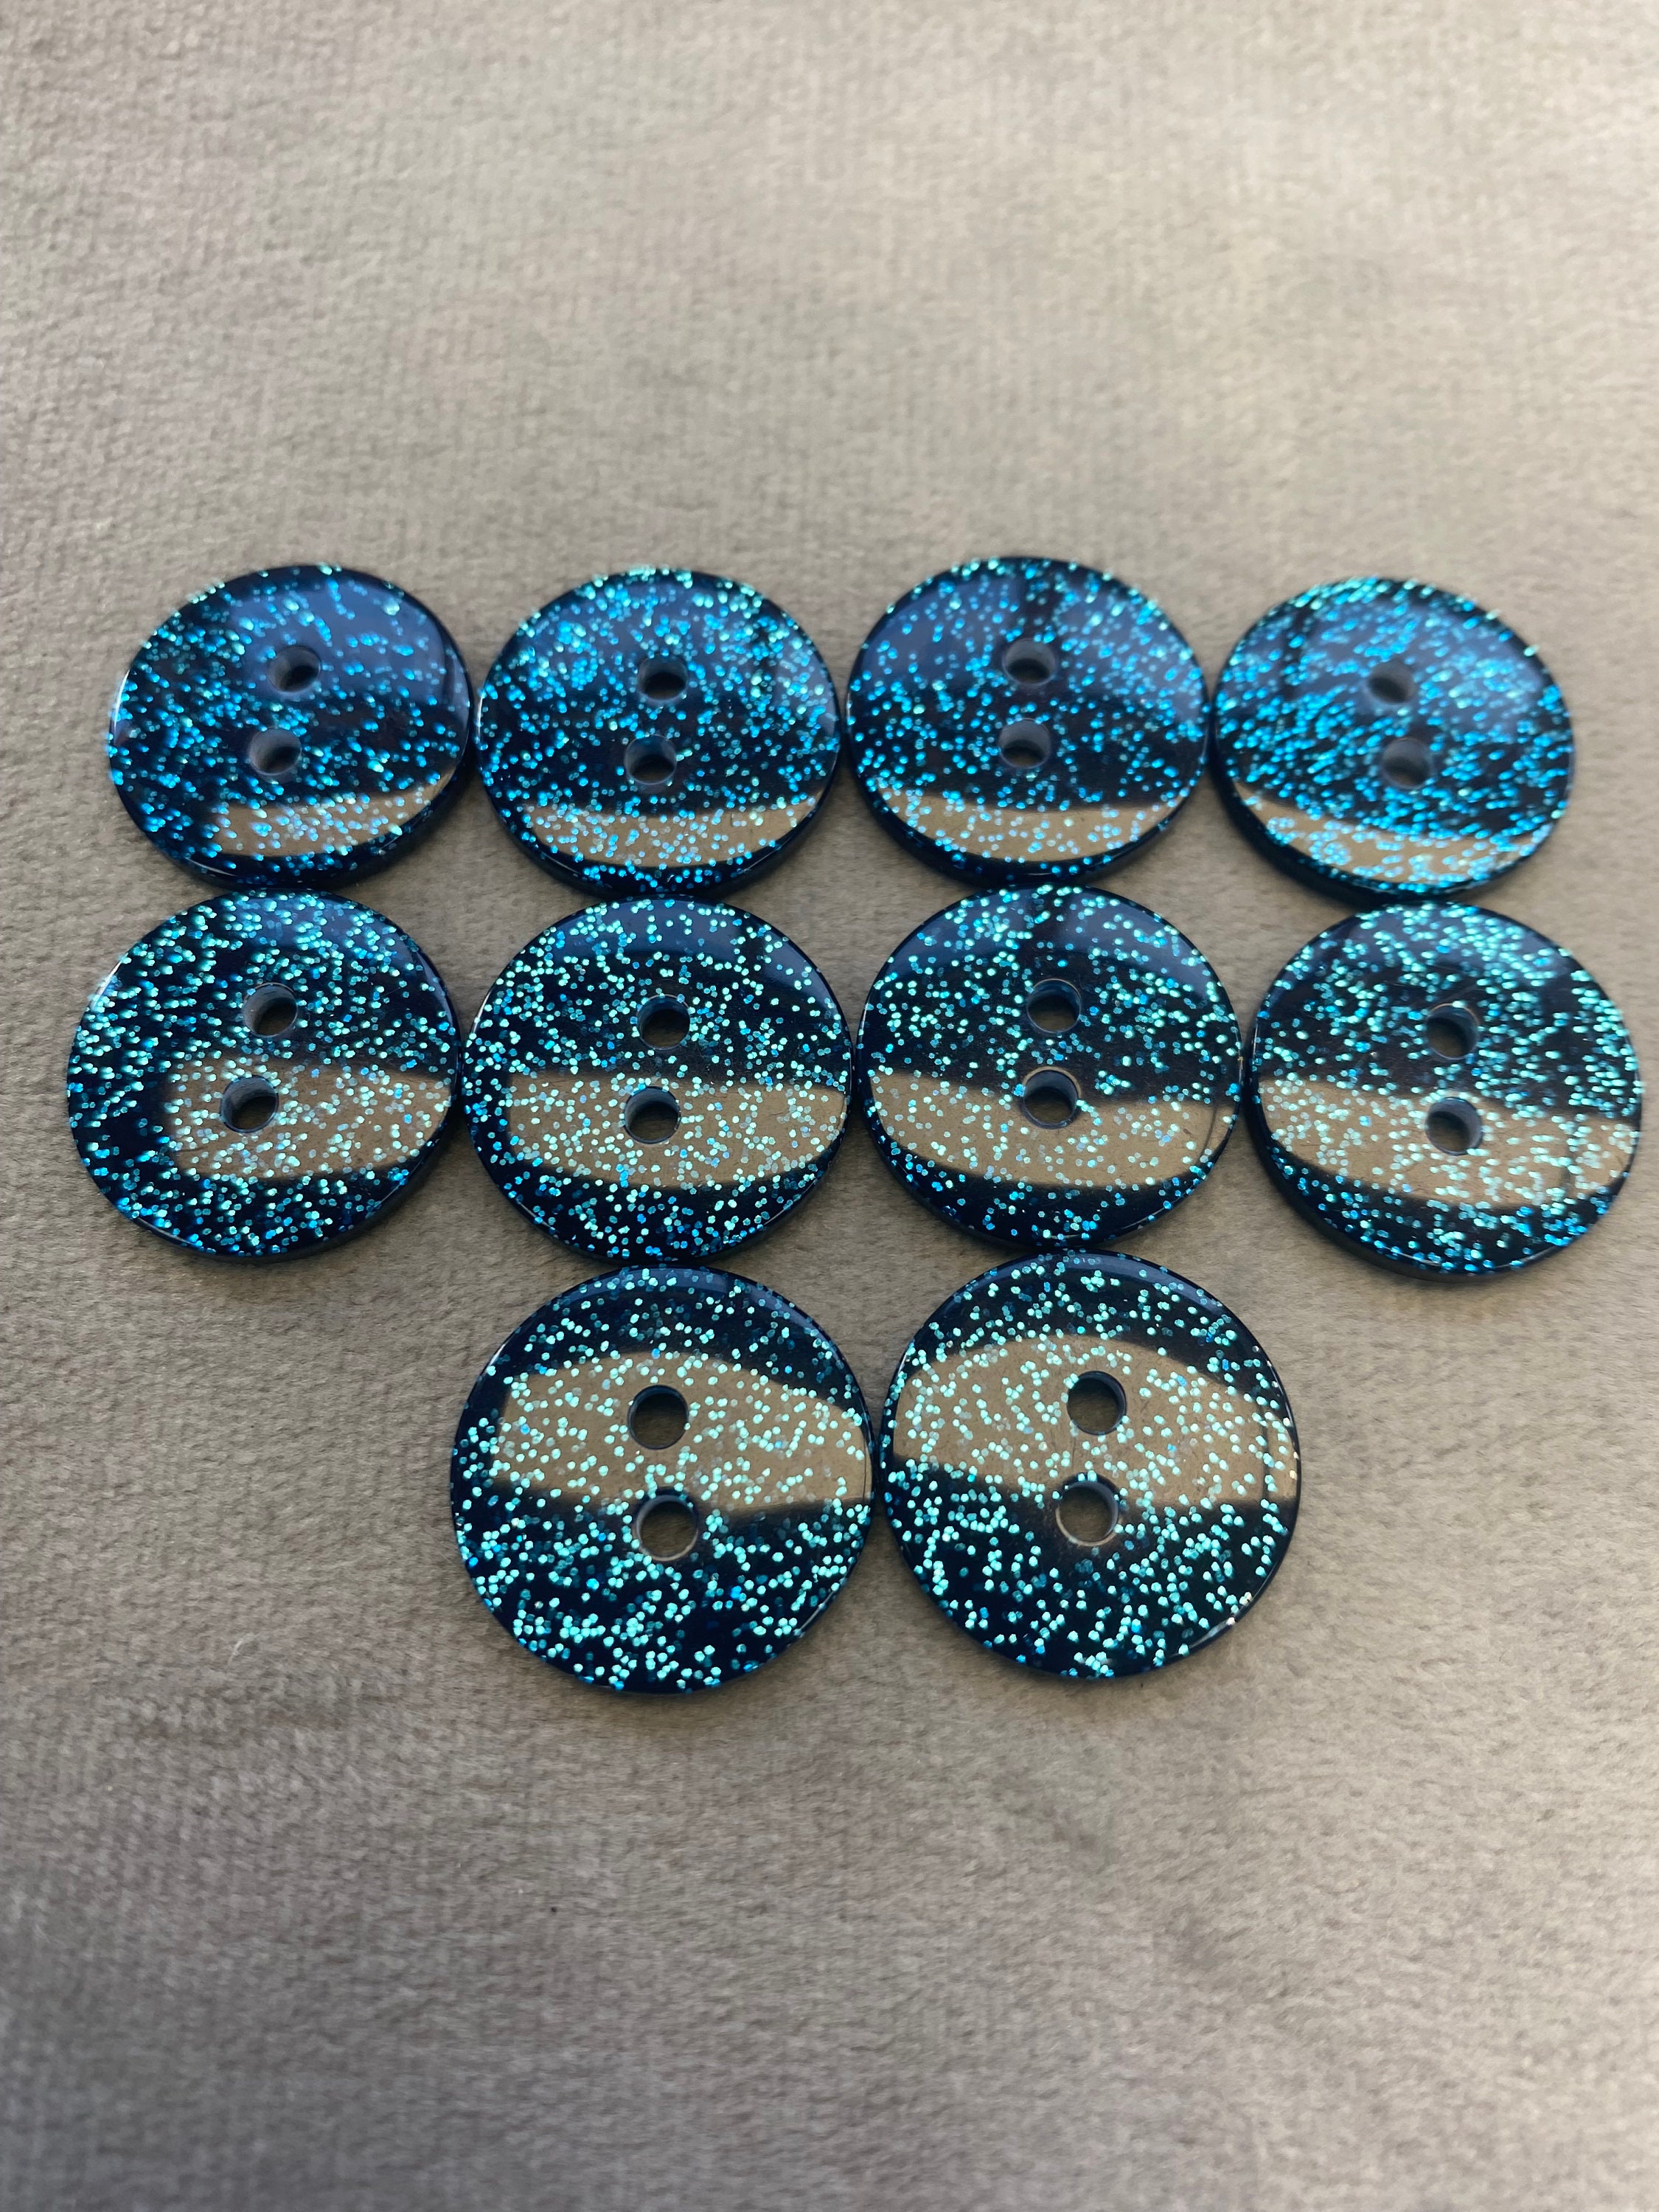 Esoca 650Pcs Turquoise Buttons for Crafts in Bulk Assorted